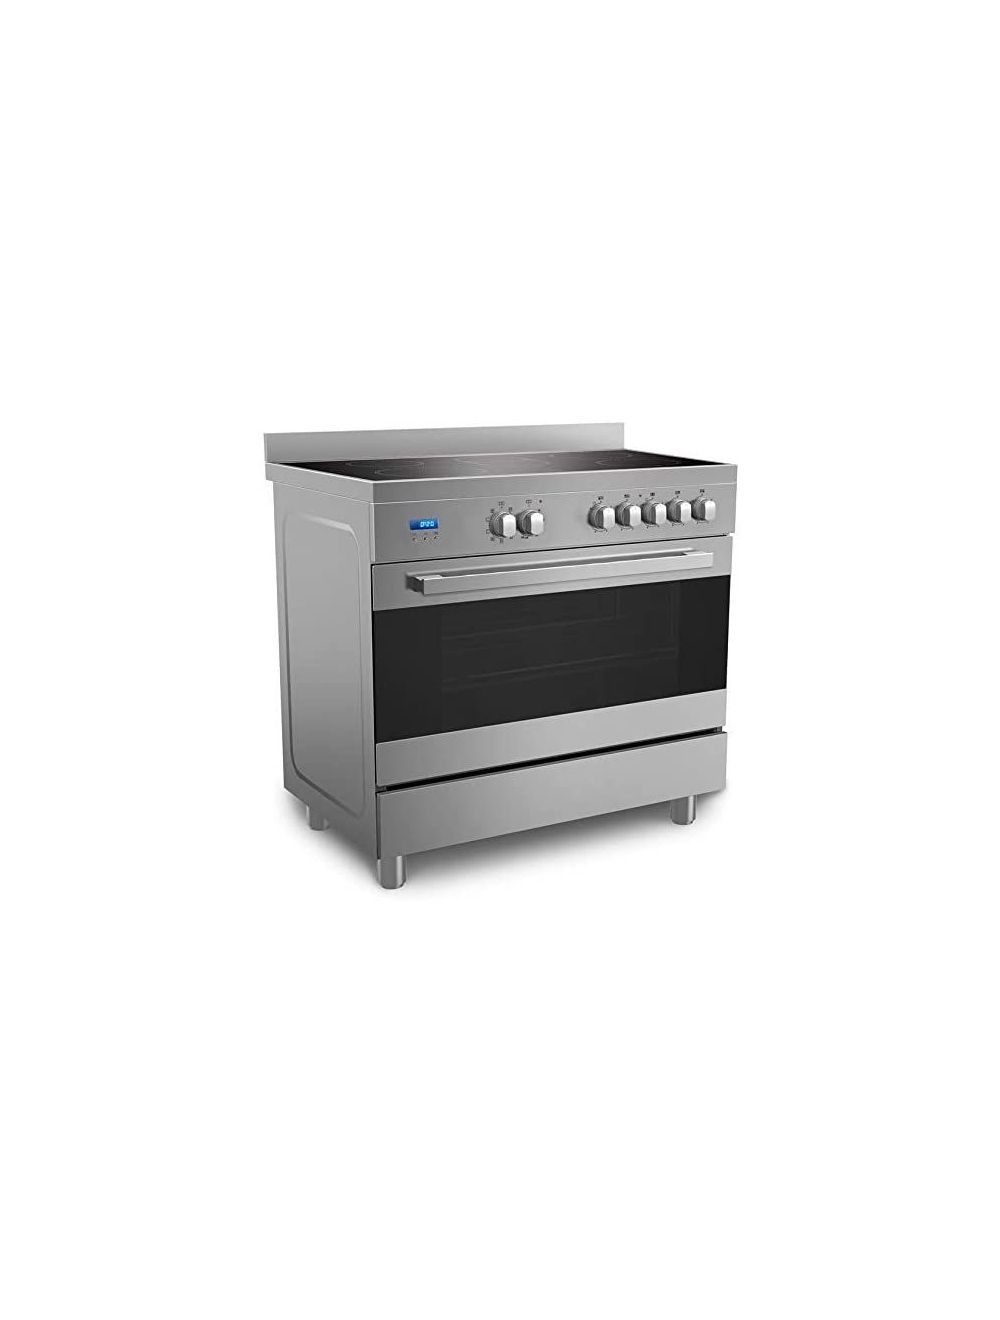 Midea 90 x 60 cm Ceramic Cooker with Schott Glass and Full Safety, Silver-VSVC96048